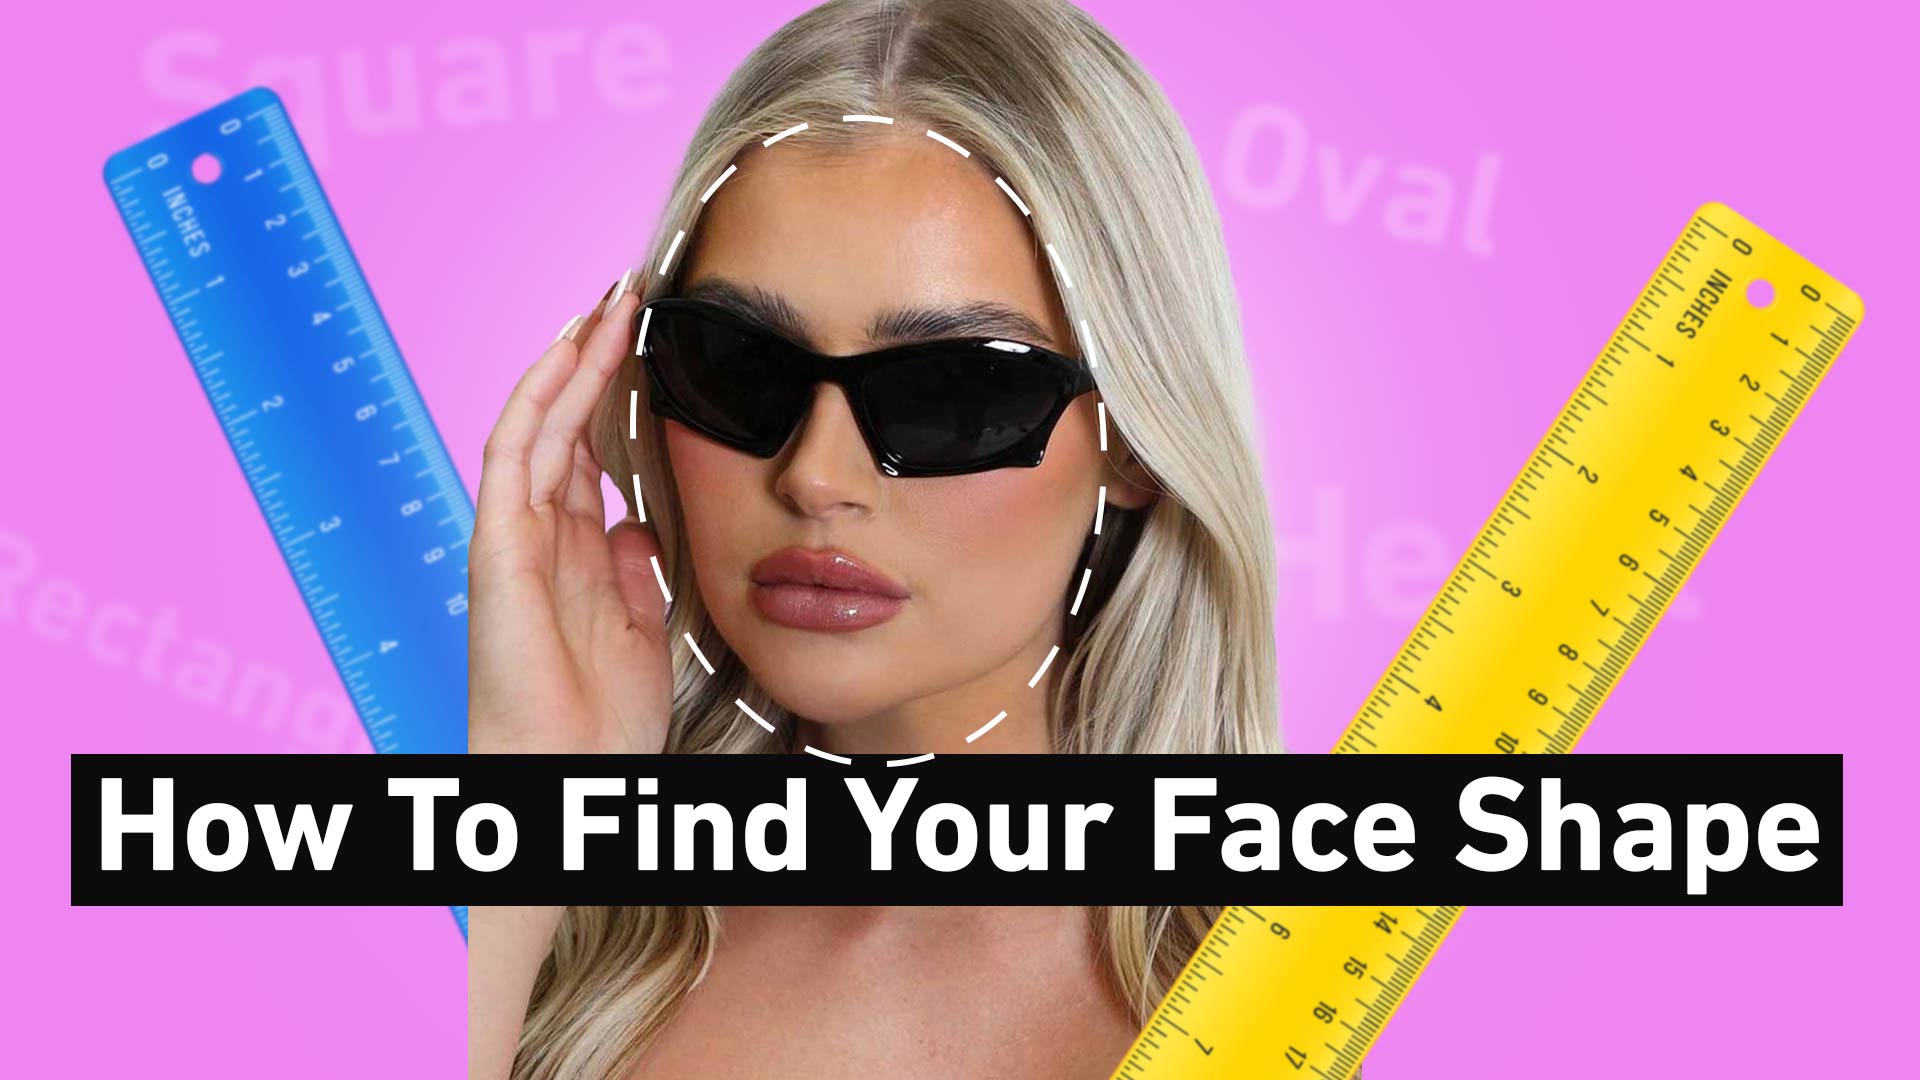 How to Find Your Face Shape